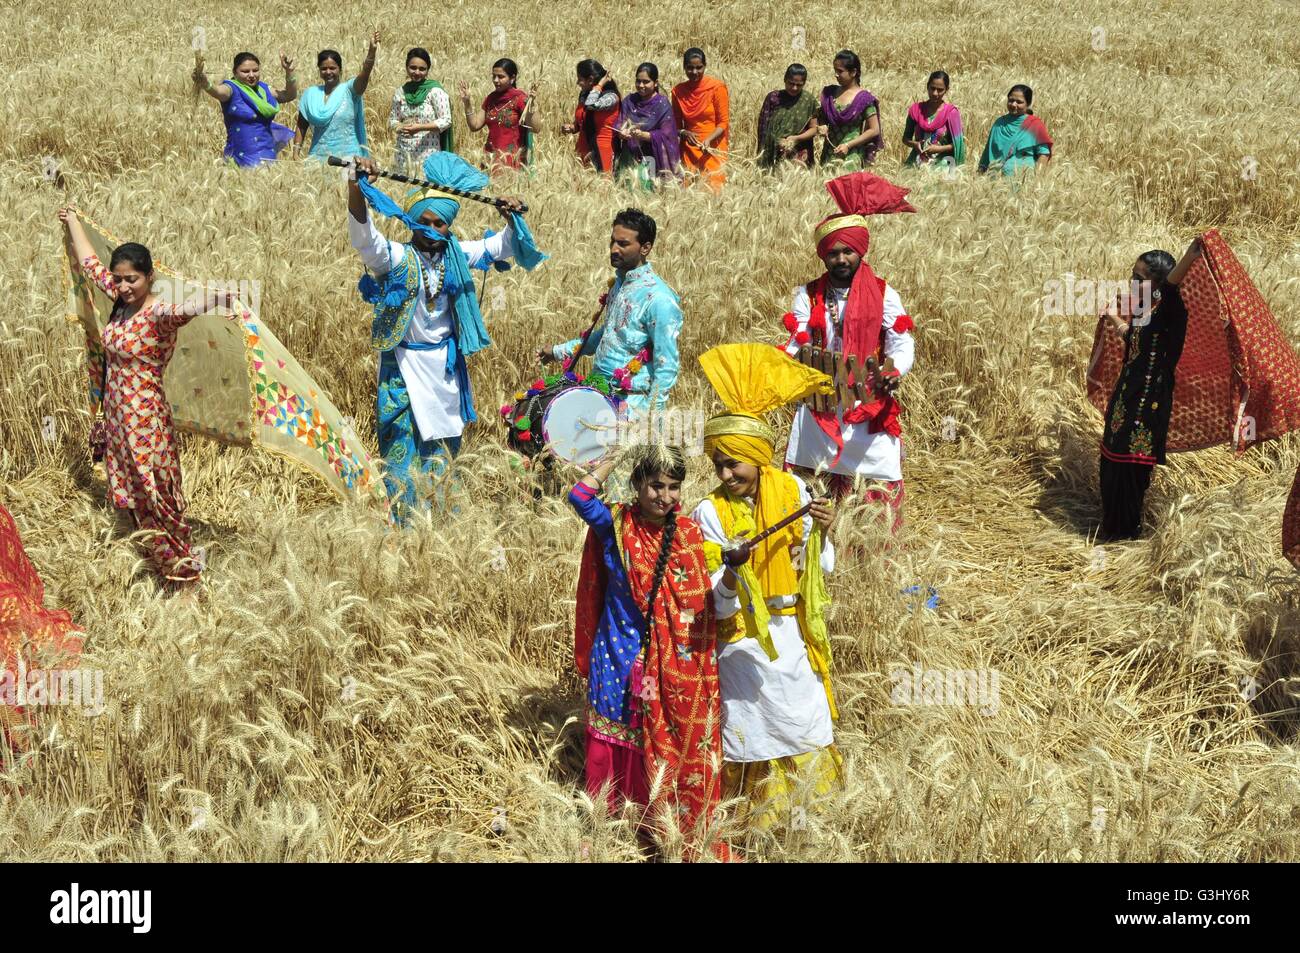 College students perform the 'Bhangra', a Punjabi folk dance, in a filed of Wheat on the eve of Vaisakhi at village Baran, Sirhind road. Vaisakhi is the festival of the first harvest of the year right after the winter season. (Photo by Rajesh Sachar / Pacific Press) Stock Photo